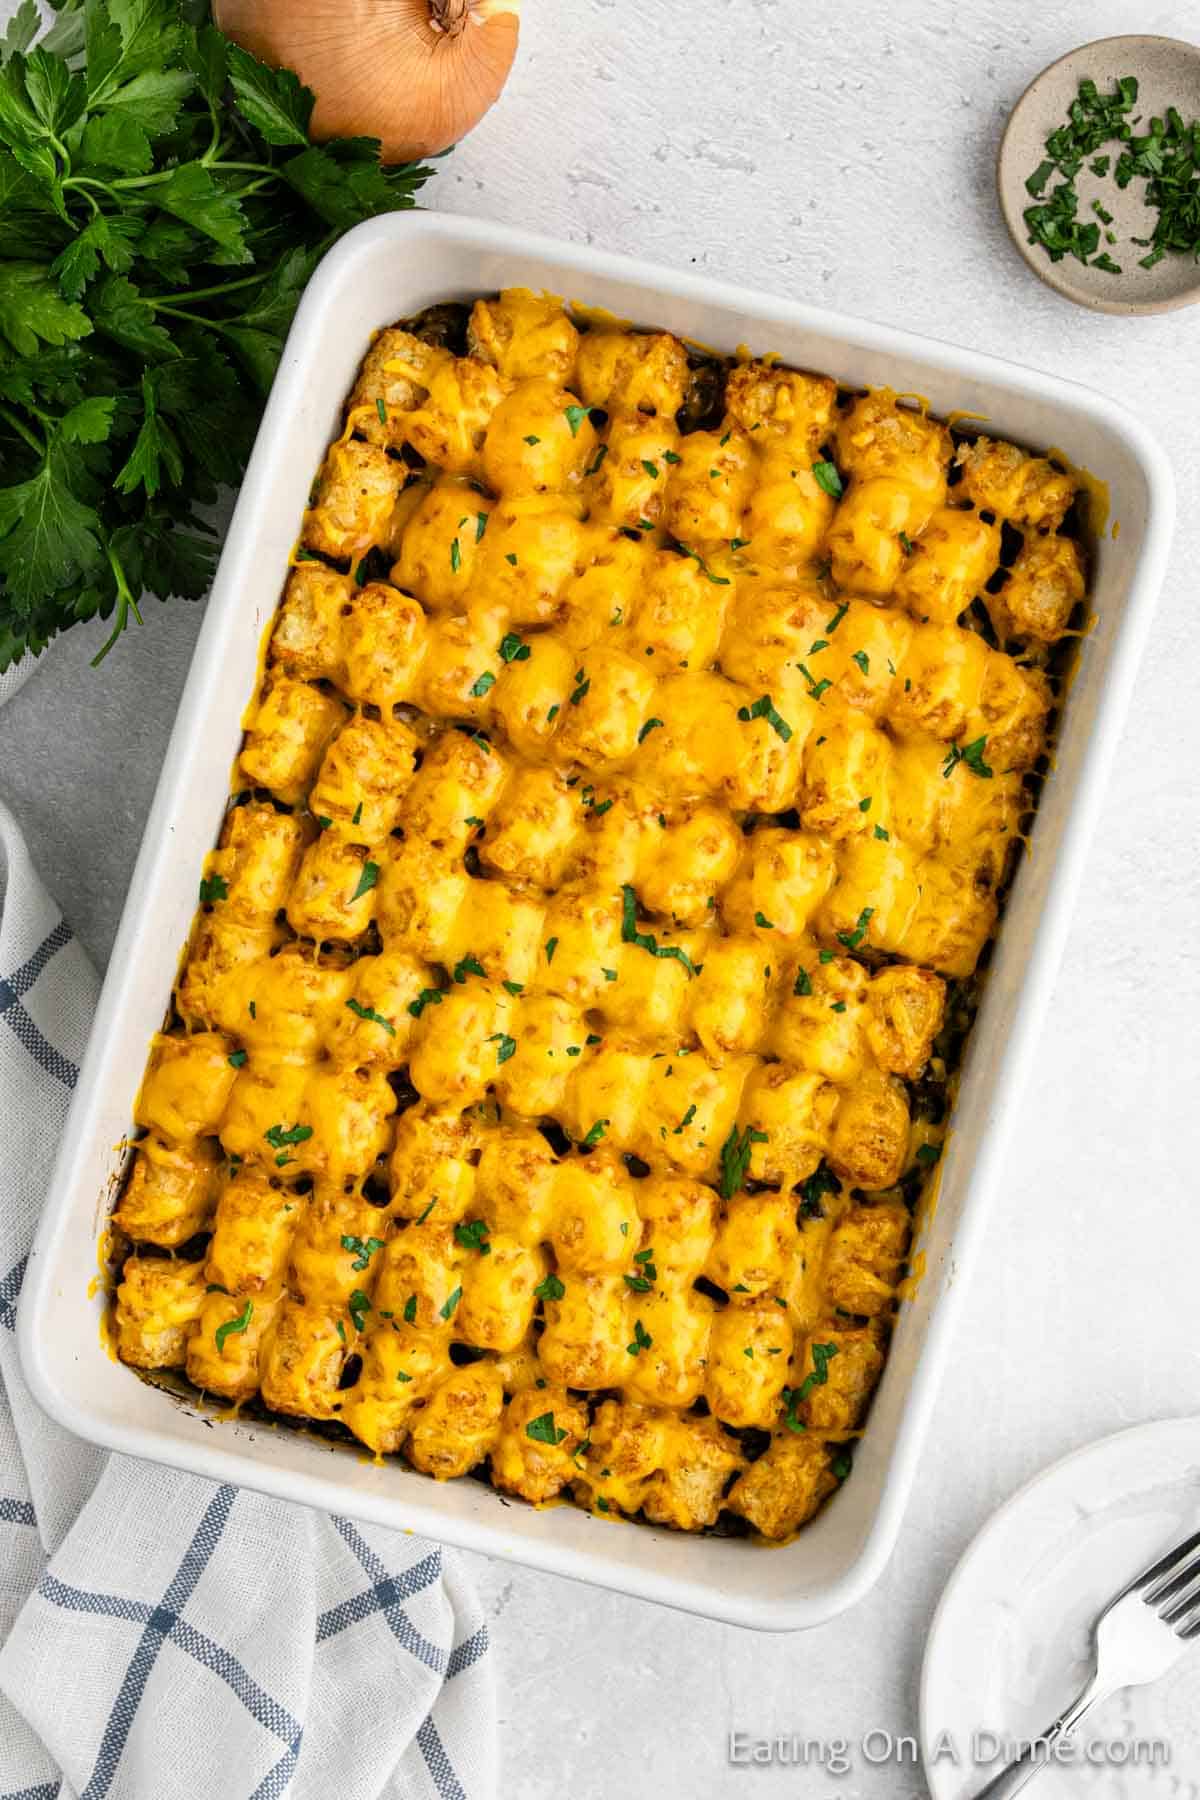 Cheeseburger tator tot casserole topped with melted cheese